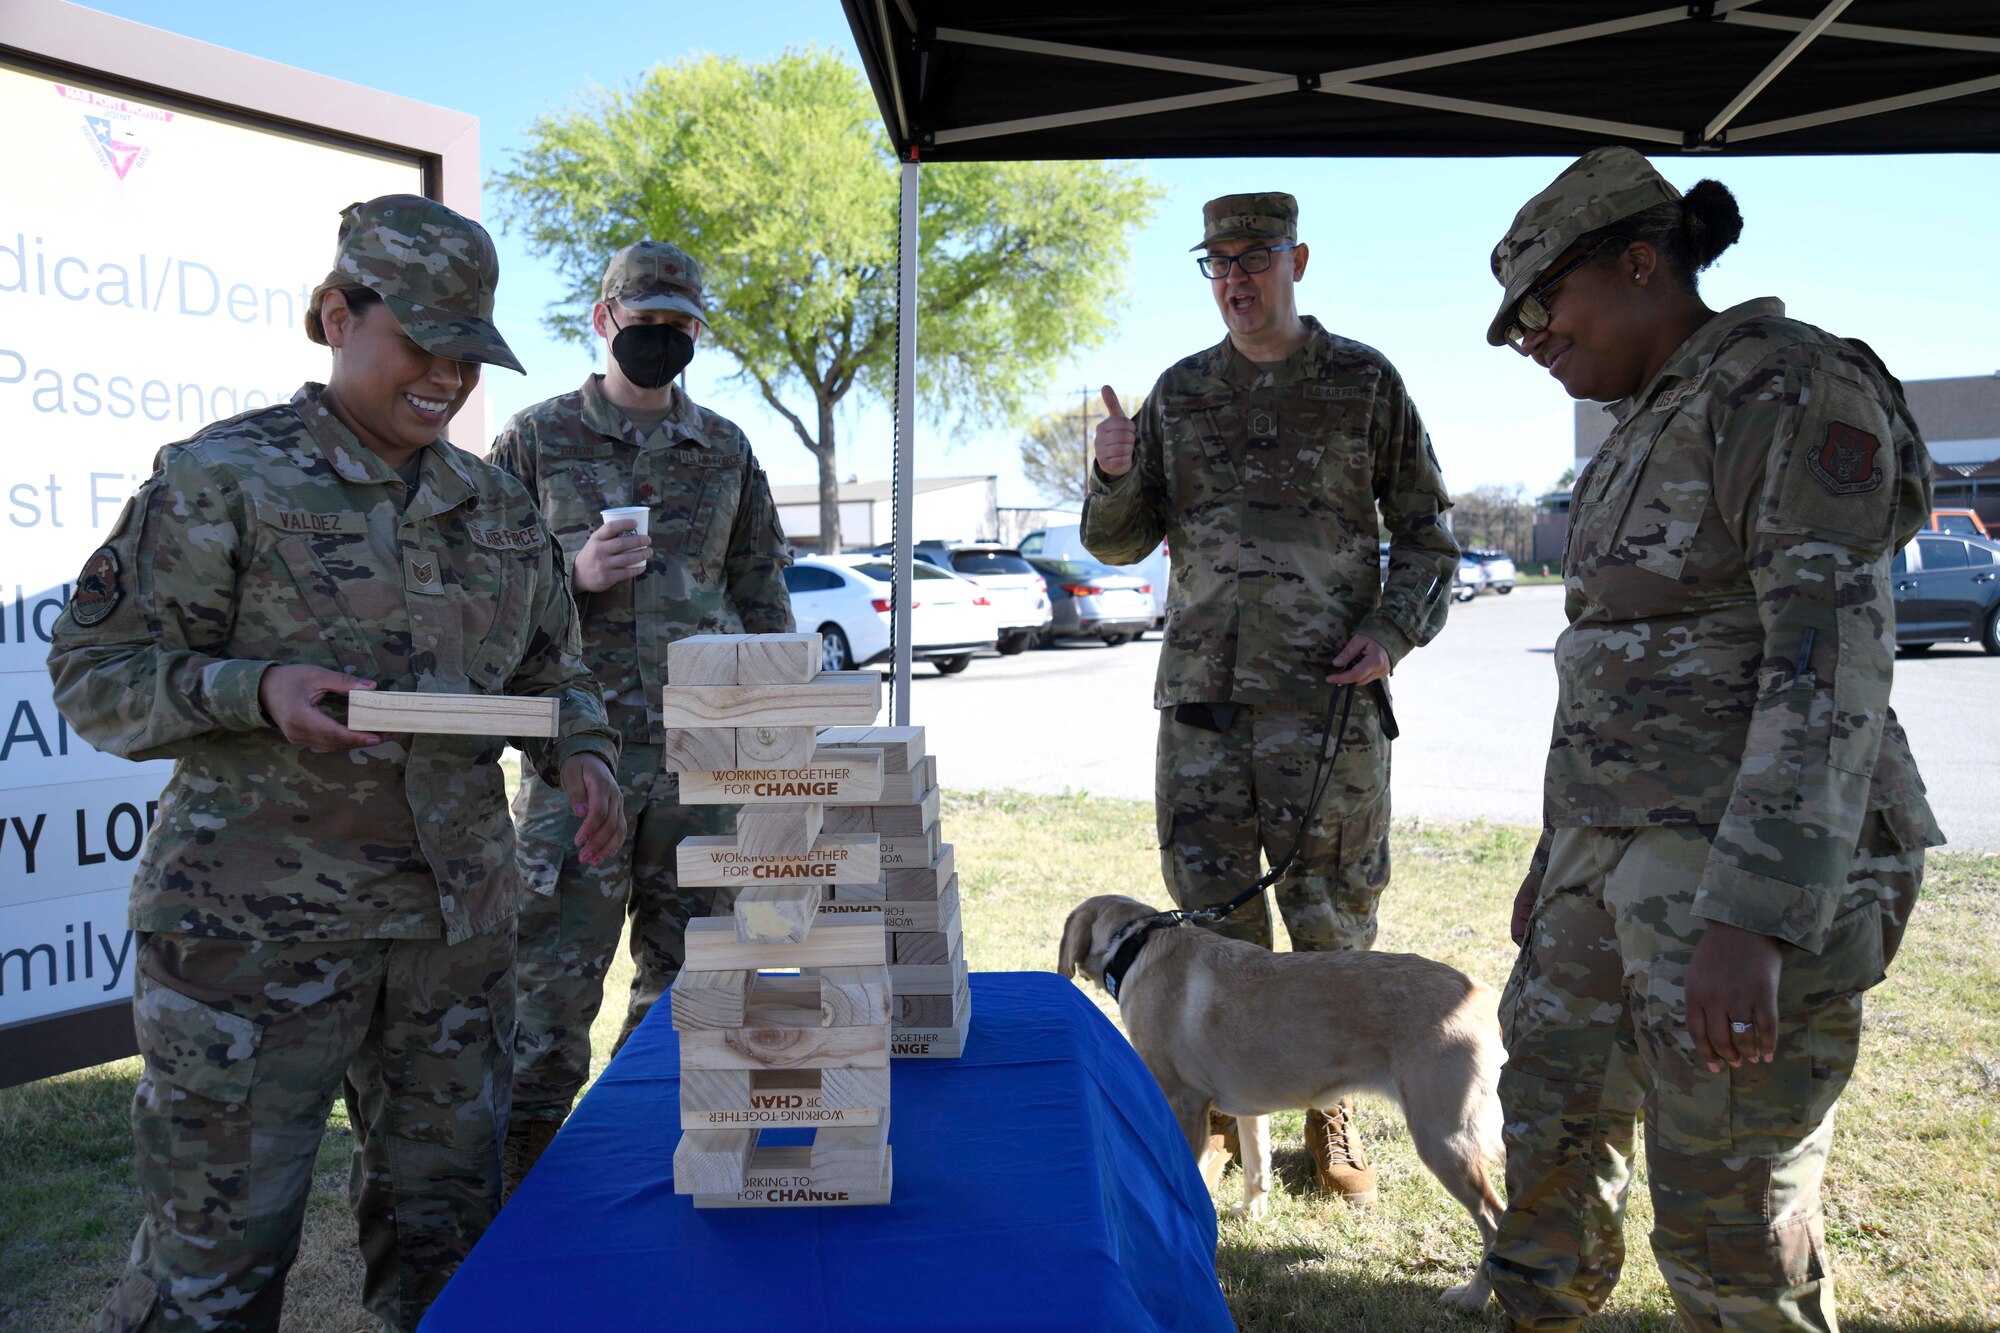 Tech. Sgt. Famari Valdez, 301 st Fighter Wing Medical Squadron mental health

technician, pulls a wooden game piece during the Sexual Assault Prevention and Response meet and greet

at Naval Air Station Joint Reserve Base Fort Worth, Texas, April 2, 2022. The SAPR team provided

outdoor games and talking points to encourage conversations and fellowship.